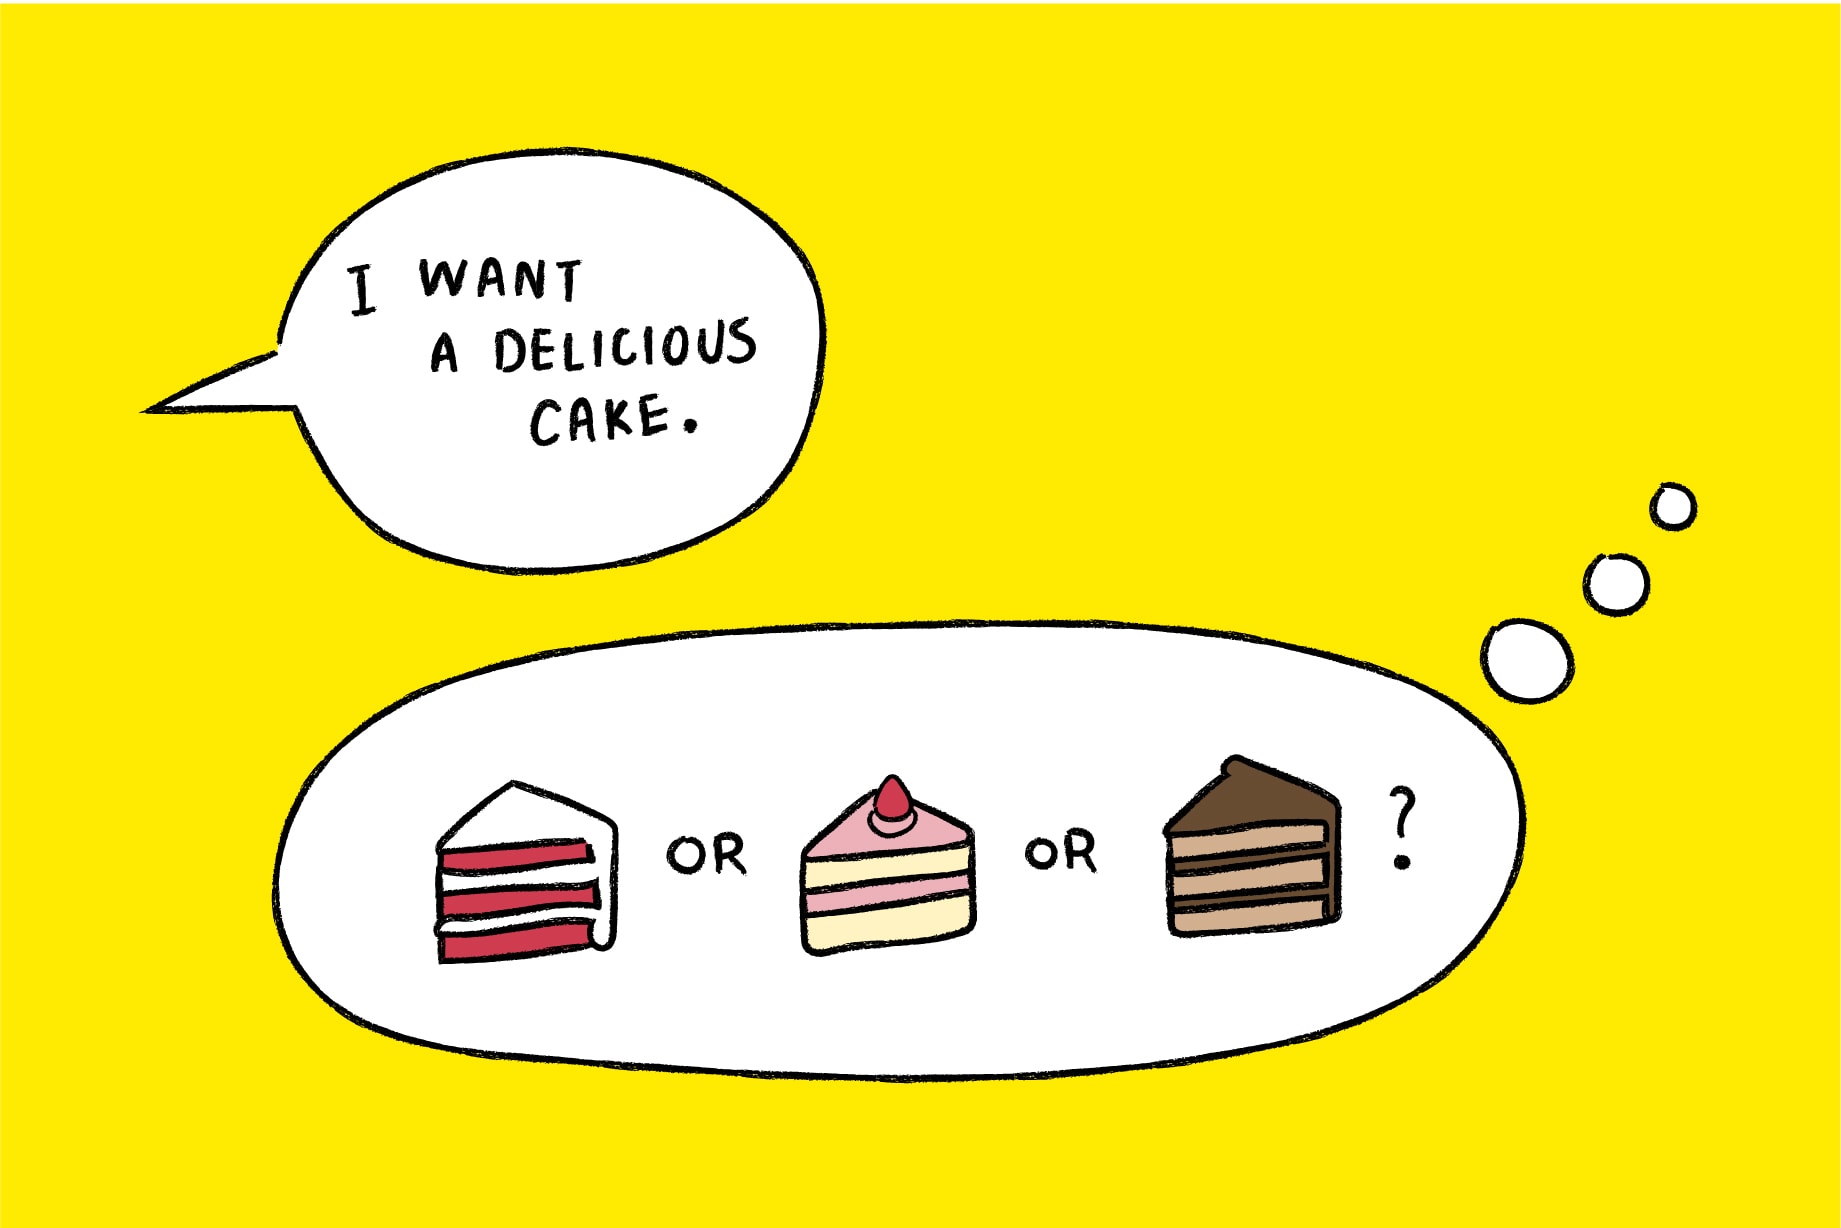 Speech bubble saying "I want a delicious cake" followed by a thought bubble with several slices of different cake and a question mark.